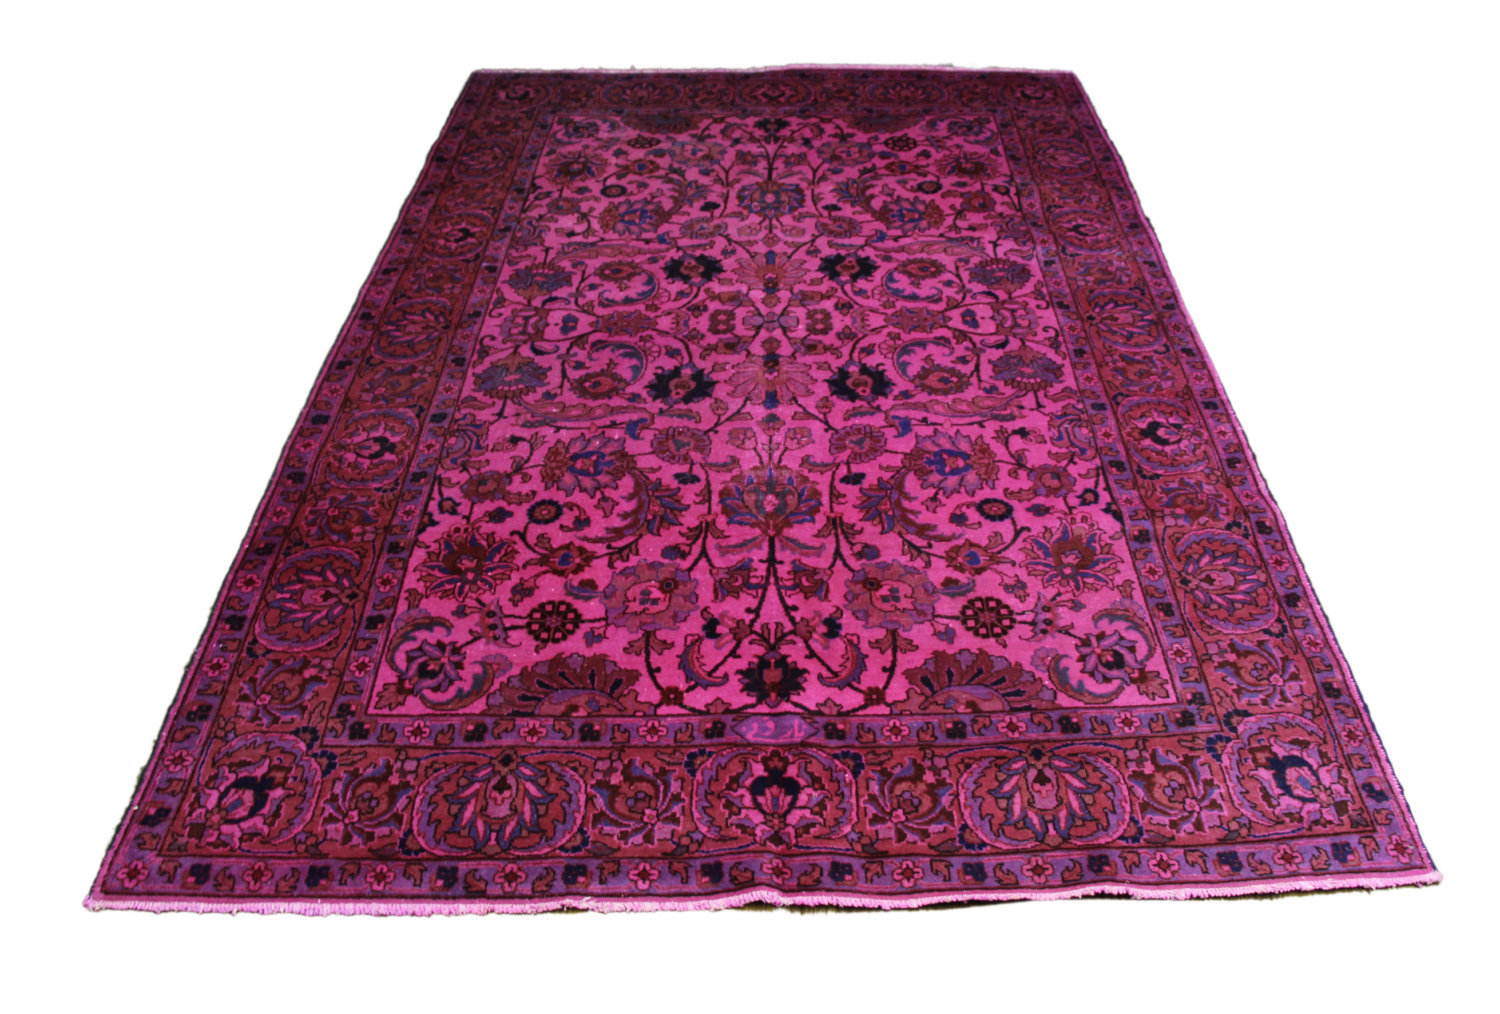 Hot Pink 6x9 Overdyed Persian Semi Antique Rug 2805